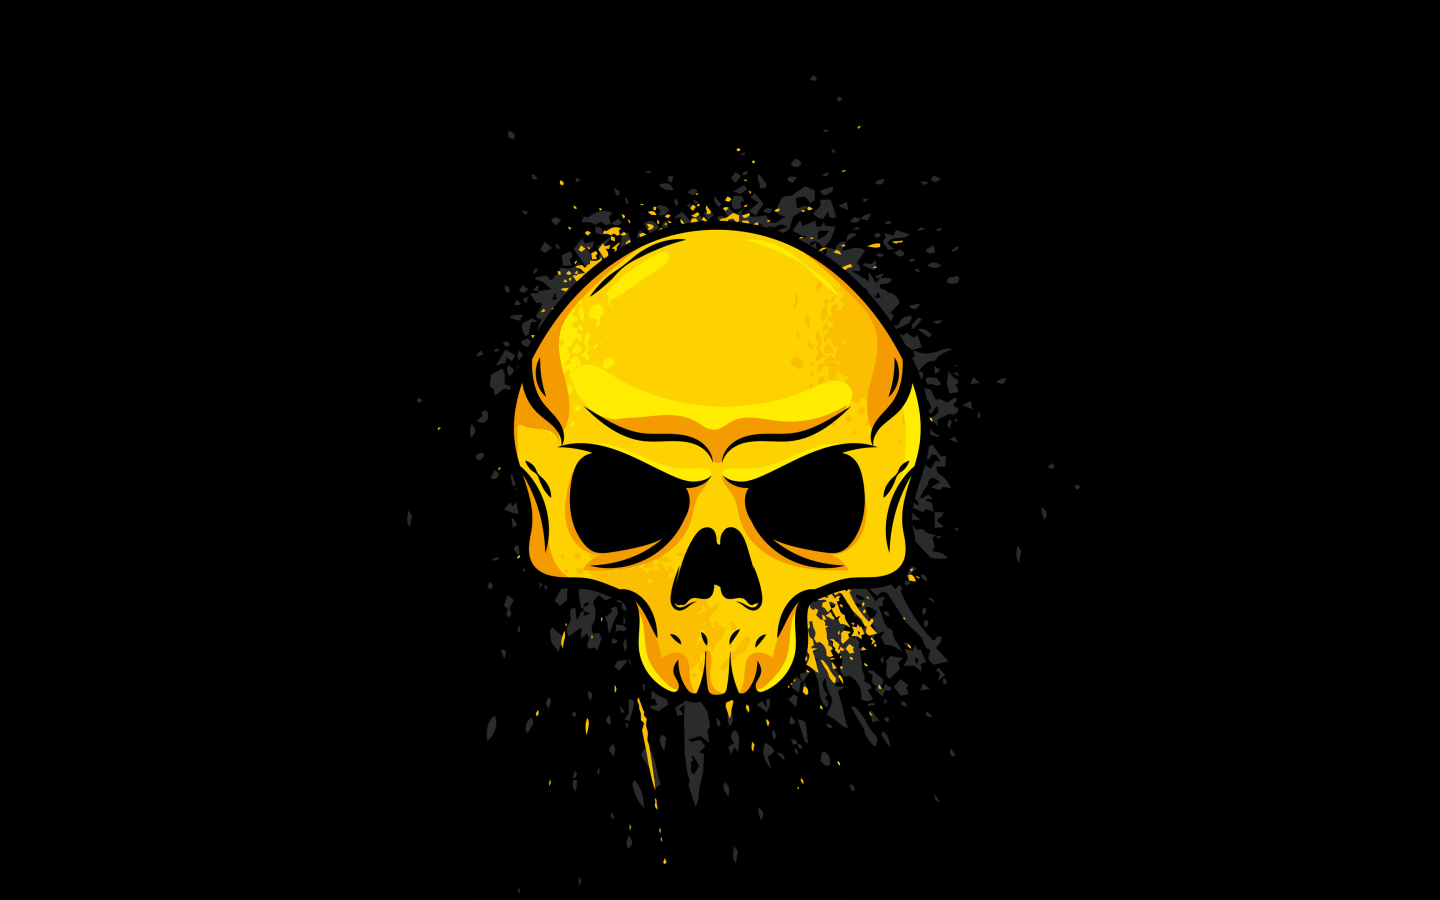 1440x900 4k Gold Skull 1440x900 Wallpaper Hd Artist 4k Wallpapers Images Photos And Background Wallpapers Den